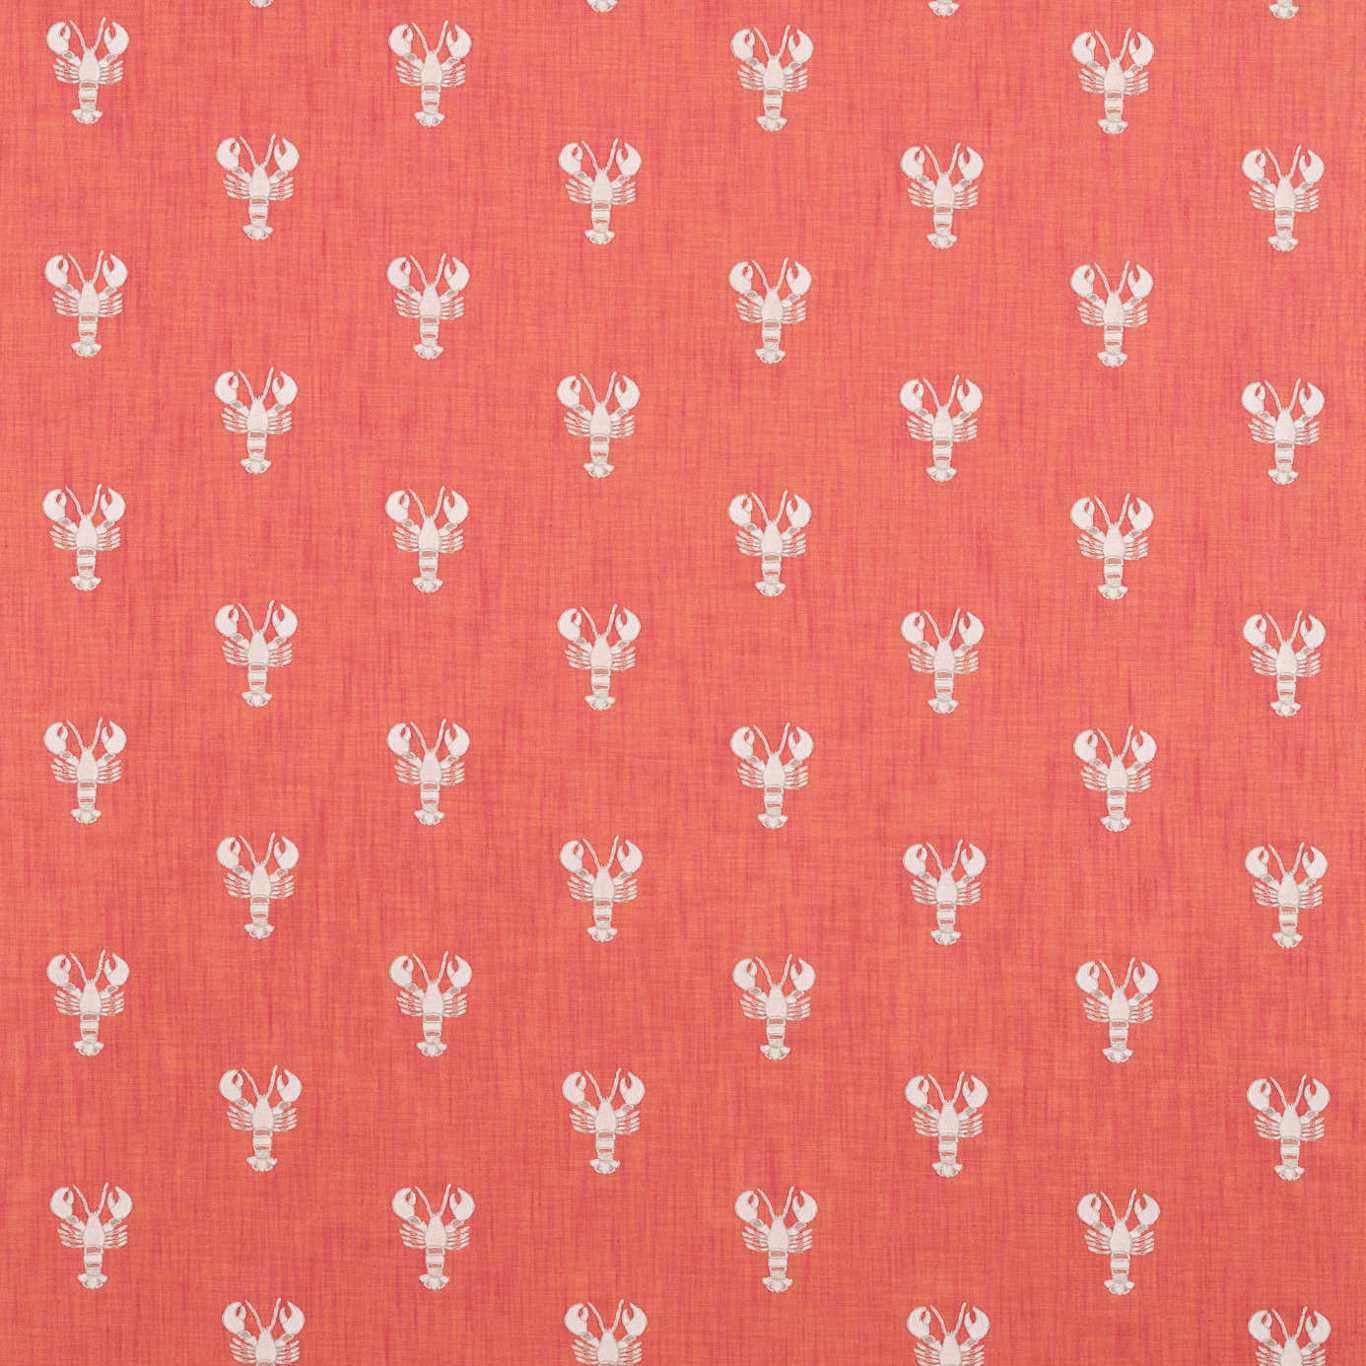 Cromer Embroidery Fabric by Sanderson Home - DCOA236677 - Coral